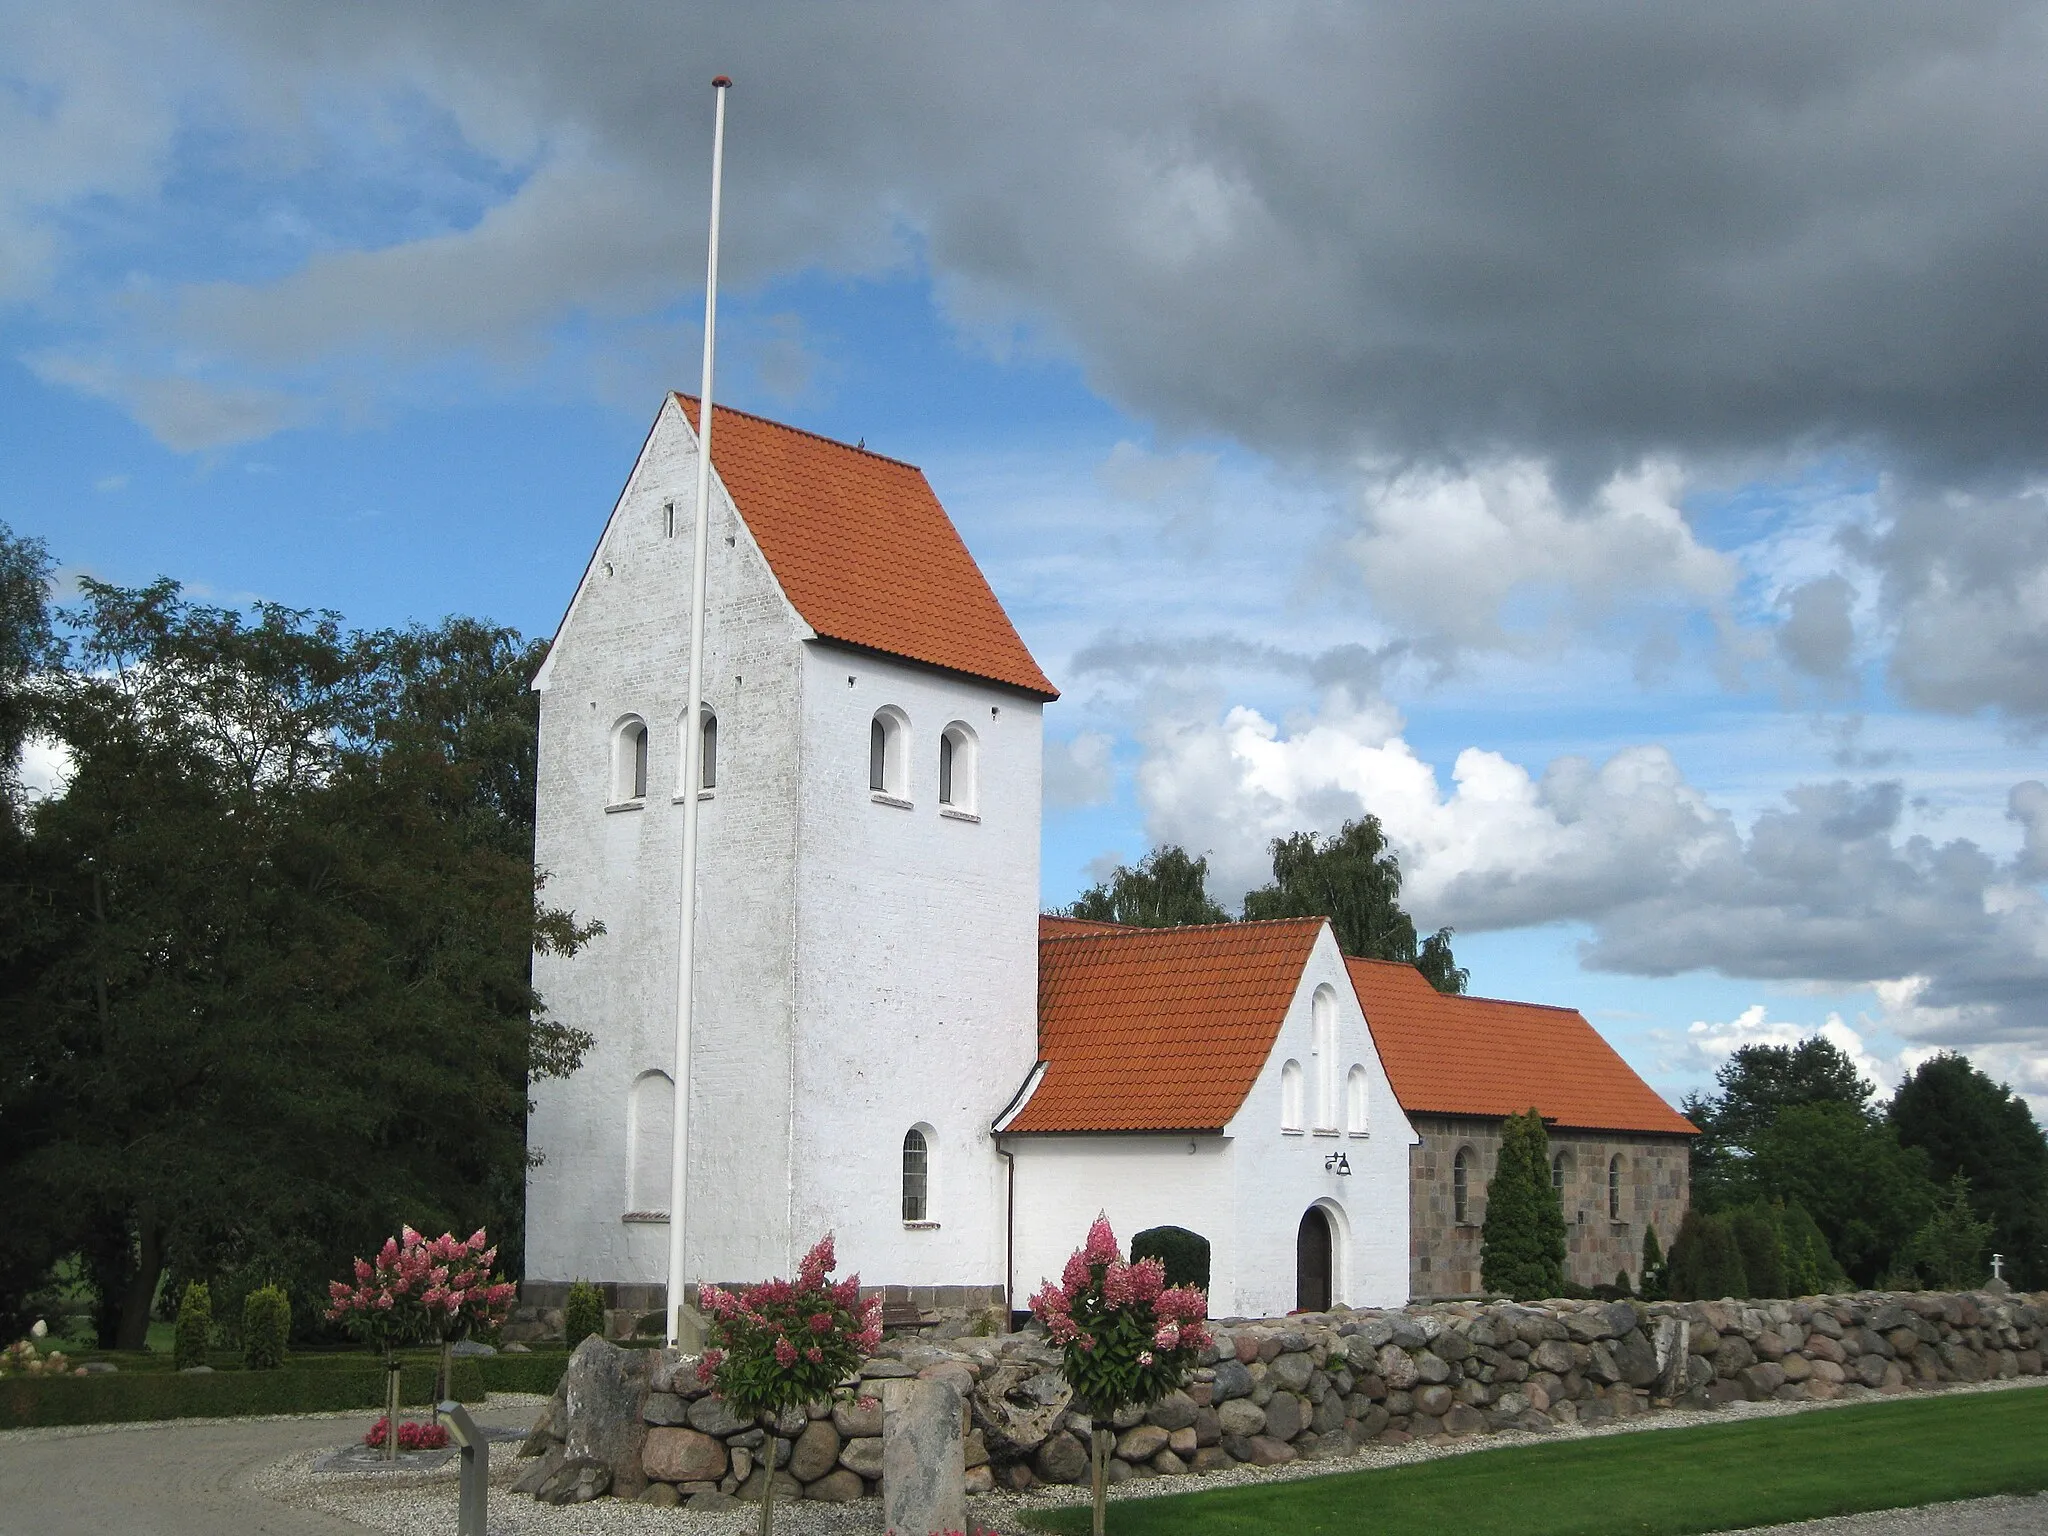 Photo showing: The church "Langå Kirke" in the small town "Langå". It is located in East Jutland, central Denmark.